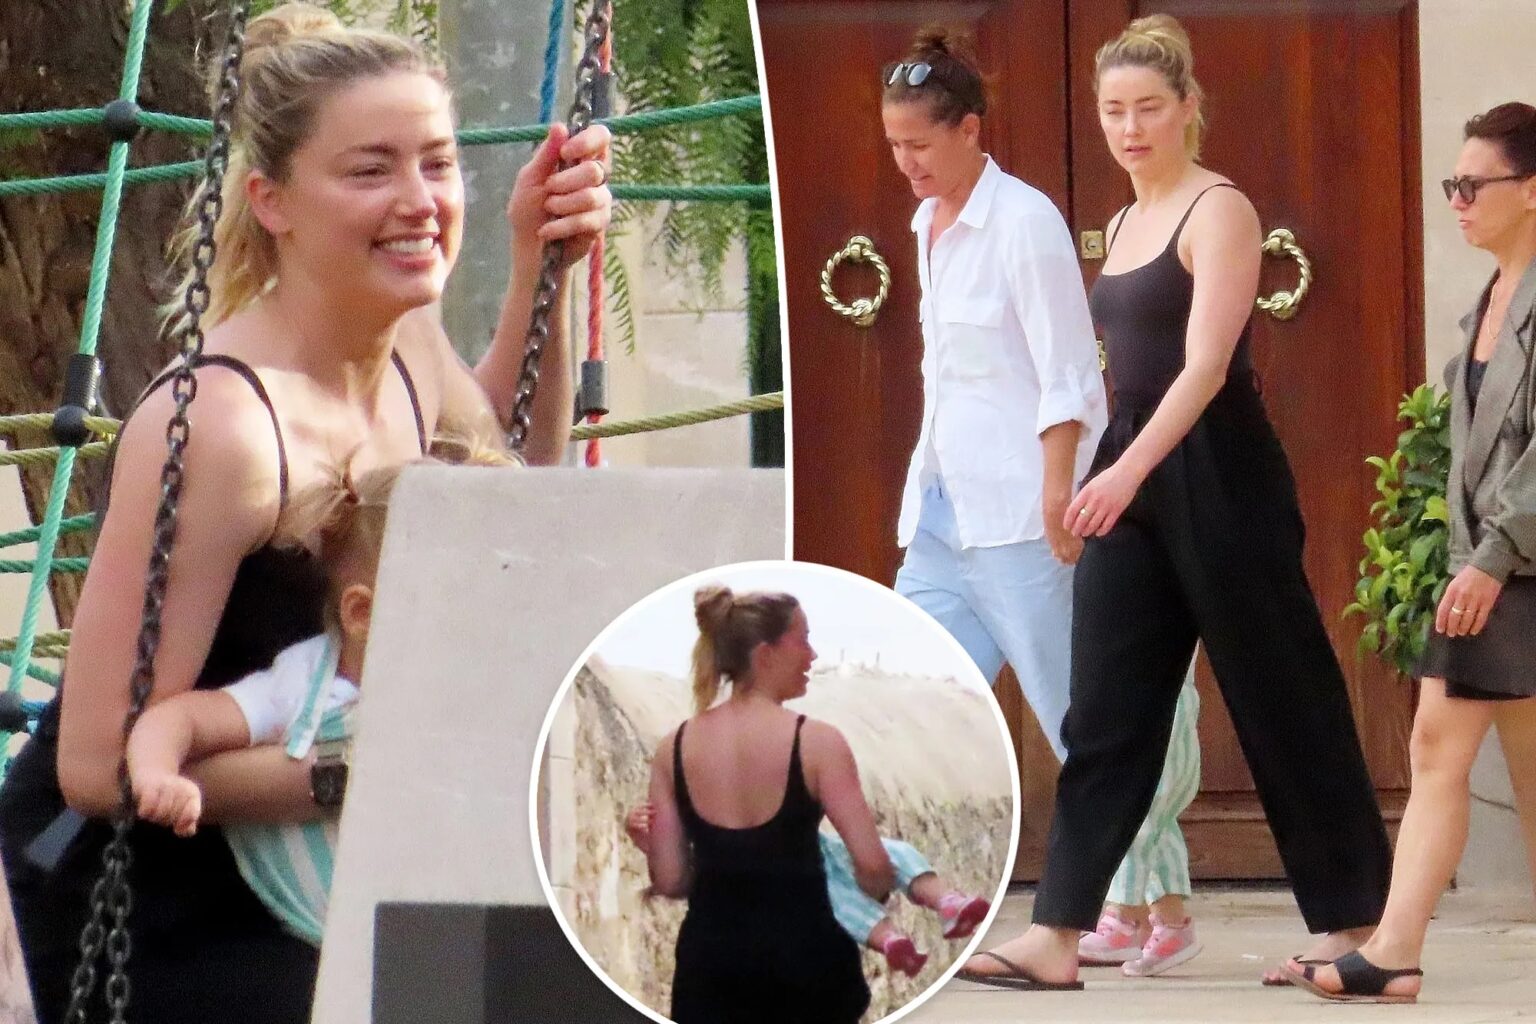 Amber Heard changes her name and moves to Spain to "get away from